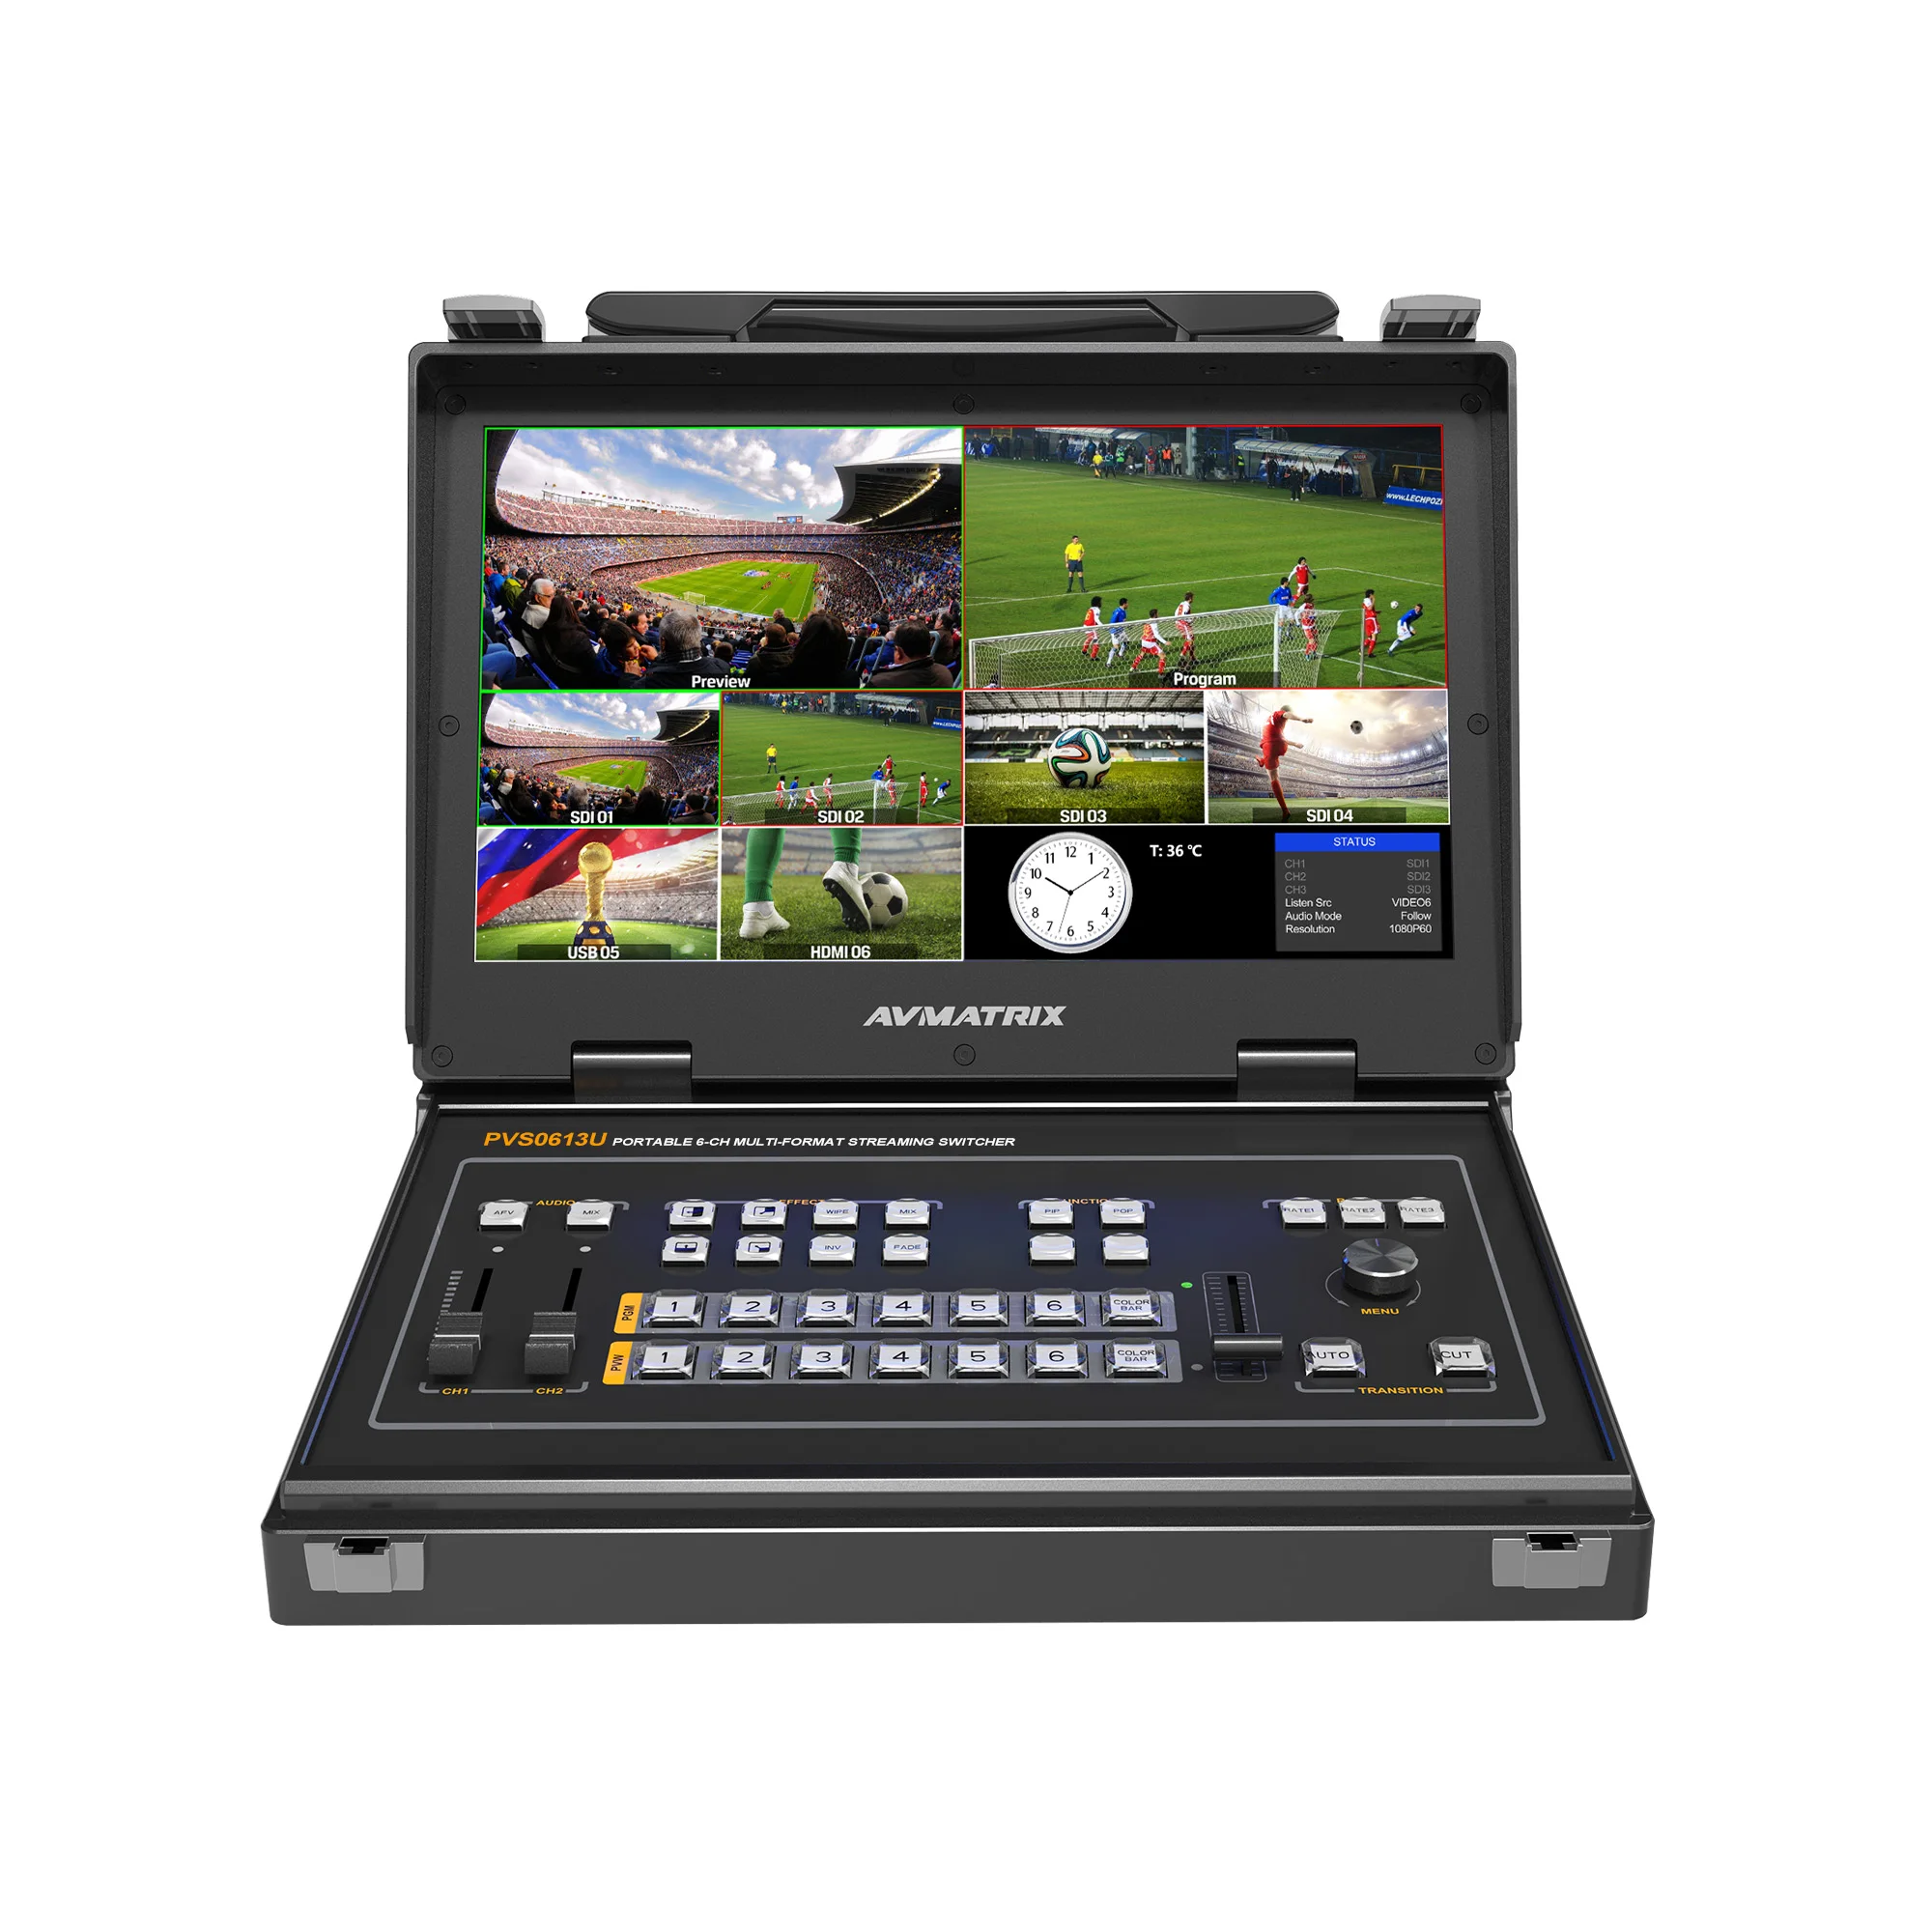 

AVMATRIX NEW PVS0613U Portable 6 Channel 4*SDI and 2*HDMI Inputs Multi-Format Streaming Switcher with 13.3 Inch IPS FHD Screen, Black